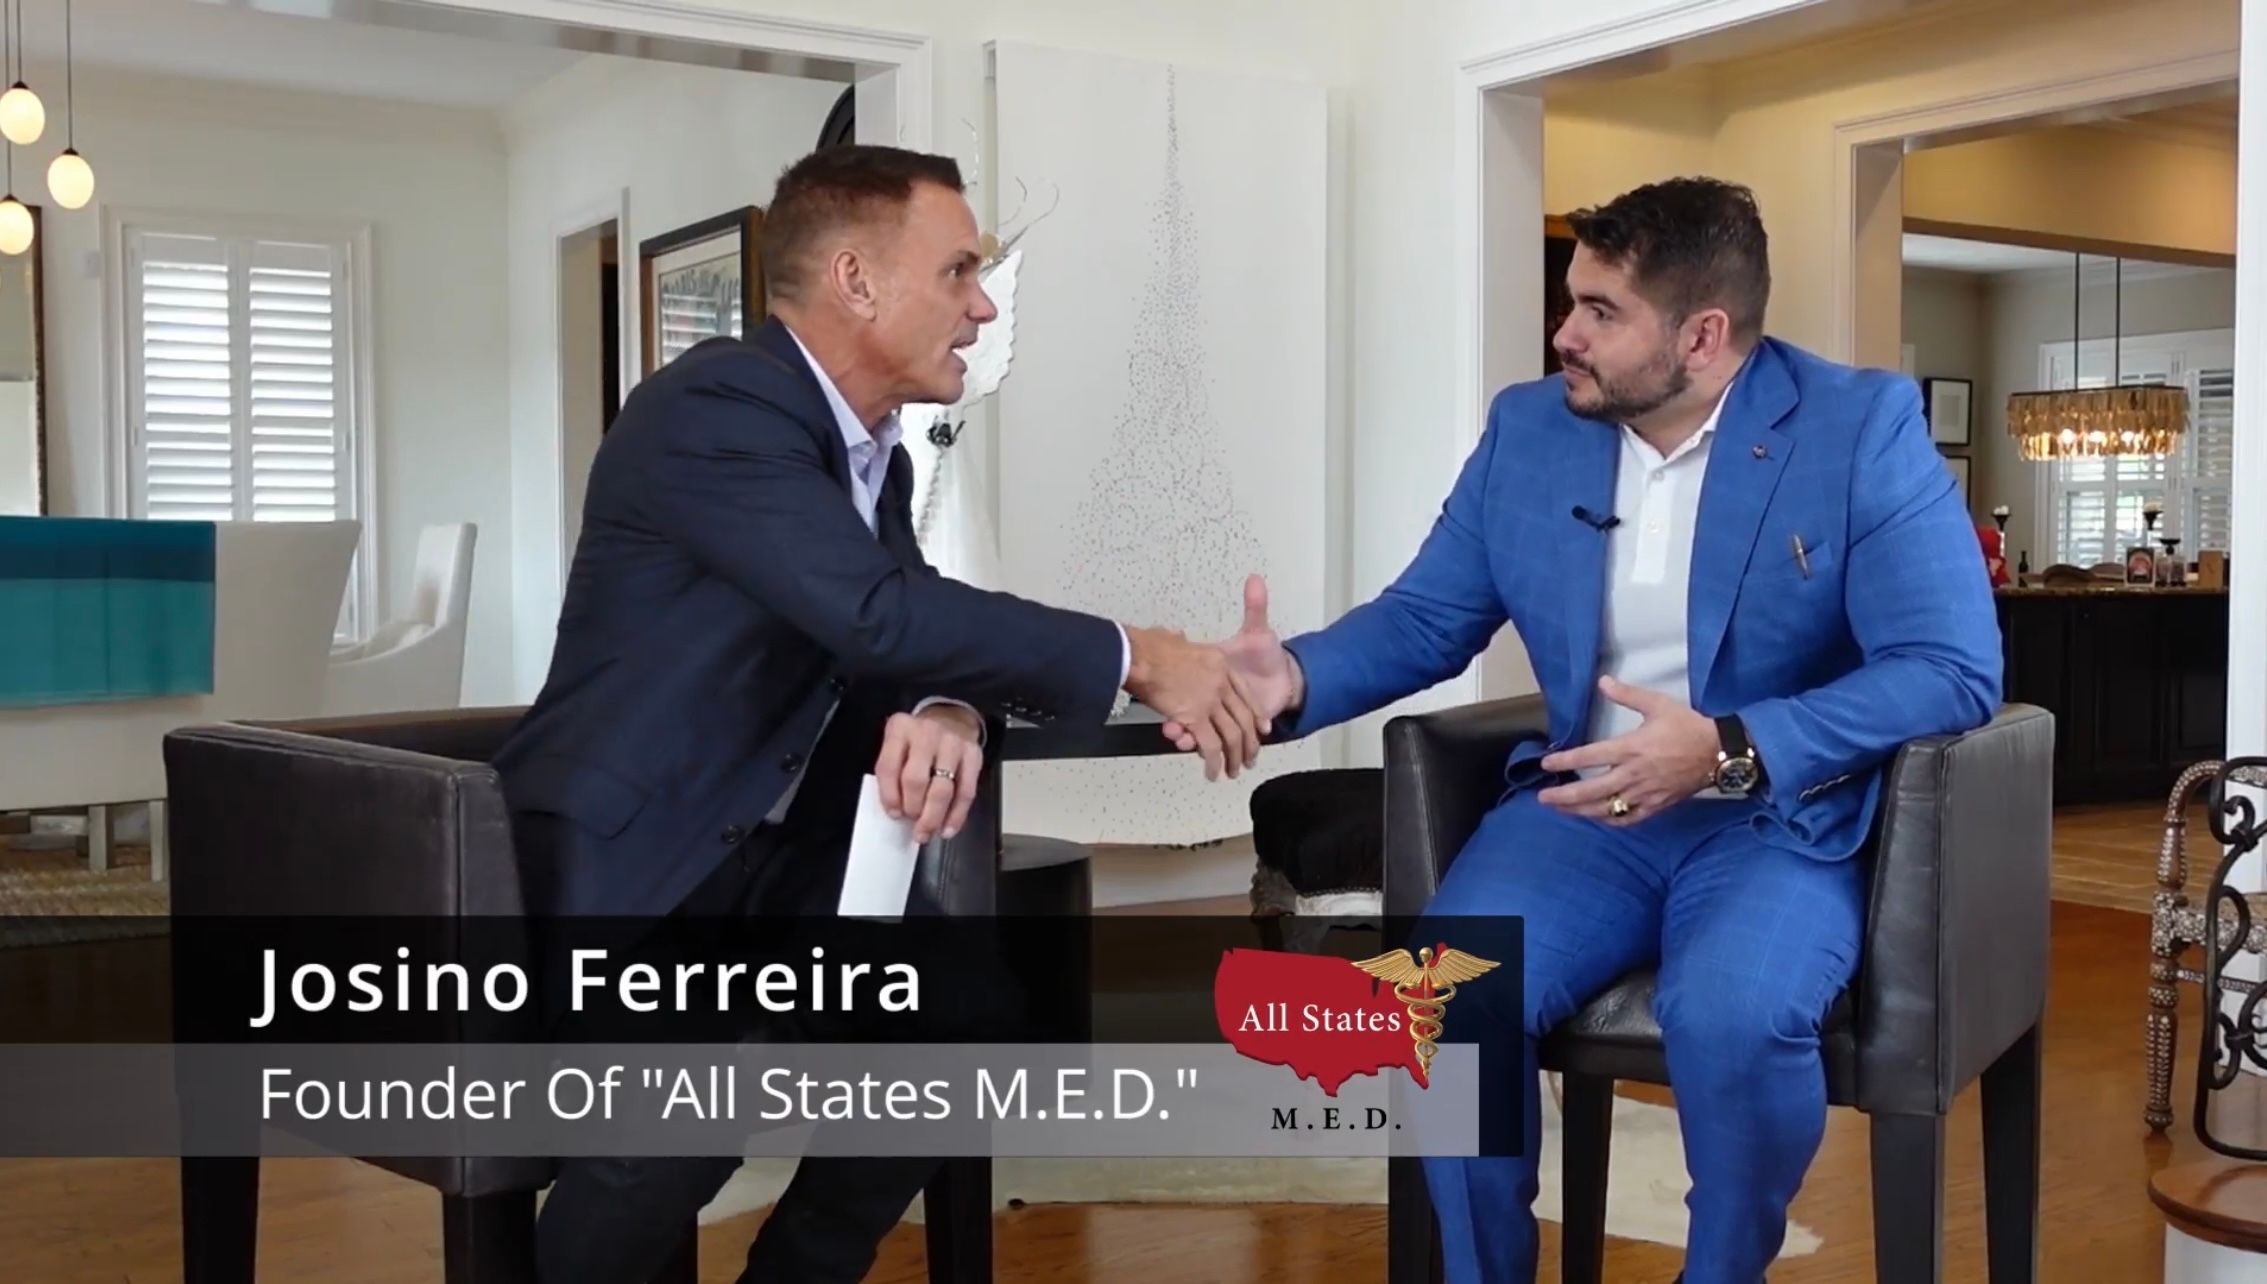 All States M.E.D. Welcomes Kevin Harrington To The Team, Launches Exciting Franchise Opportunities In The Medical Equipment Industry